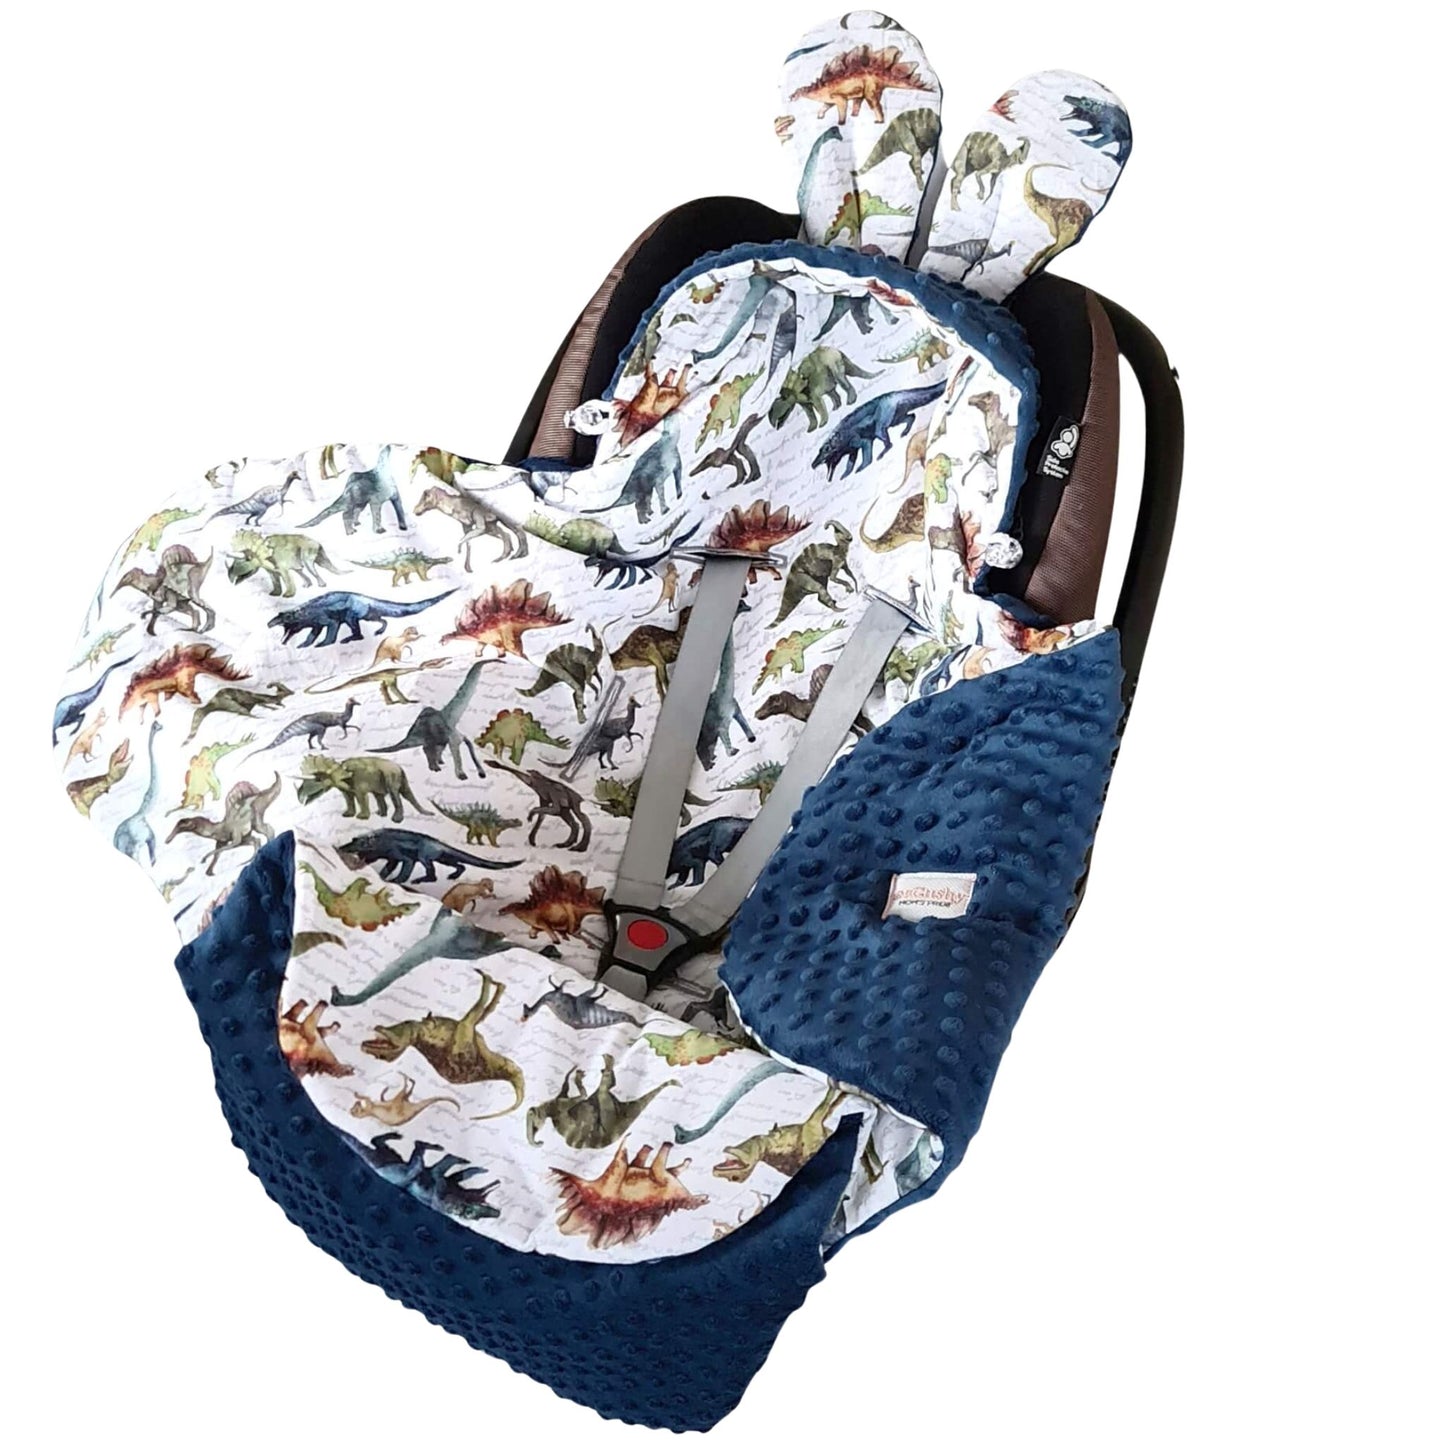 baby car seat blanket with hood navy blue with dinosaurs pattern